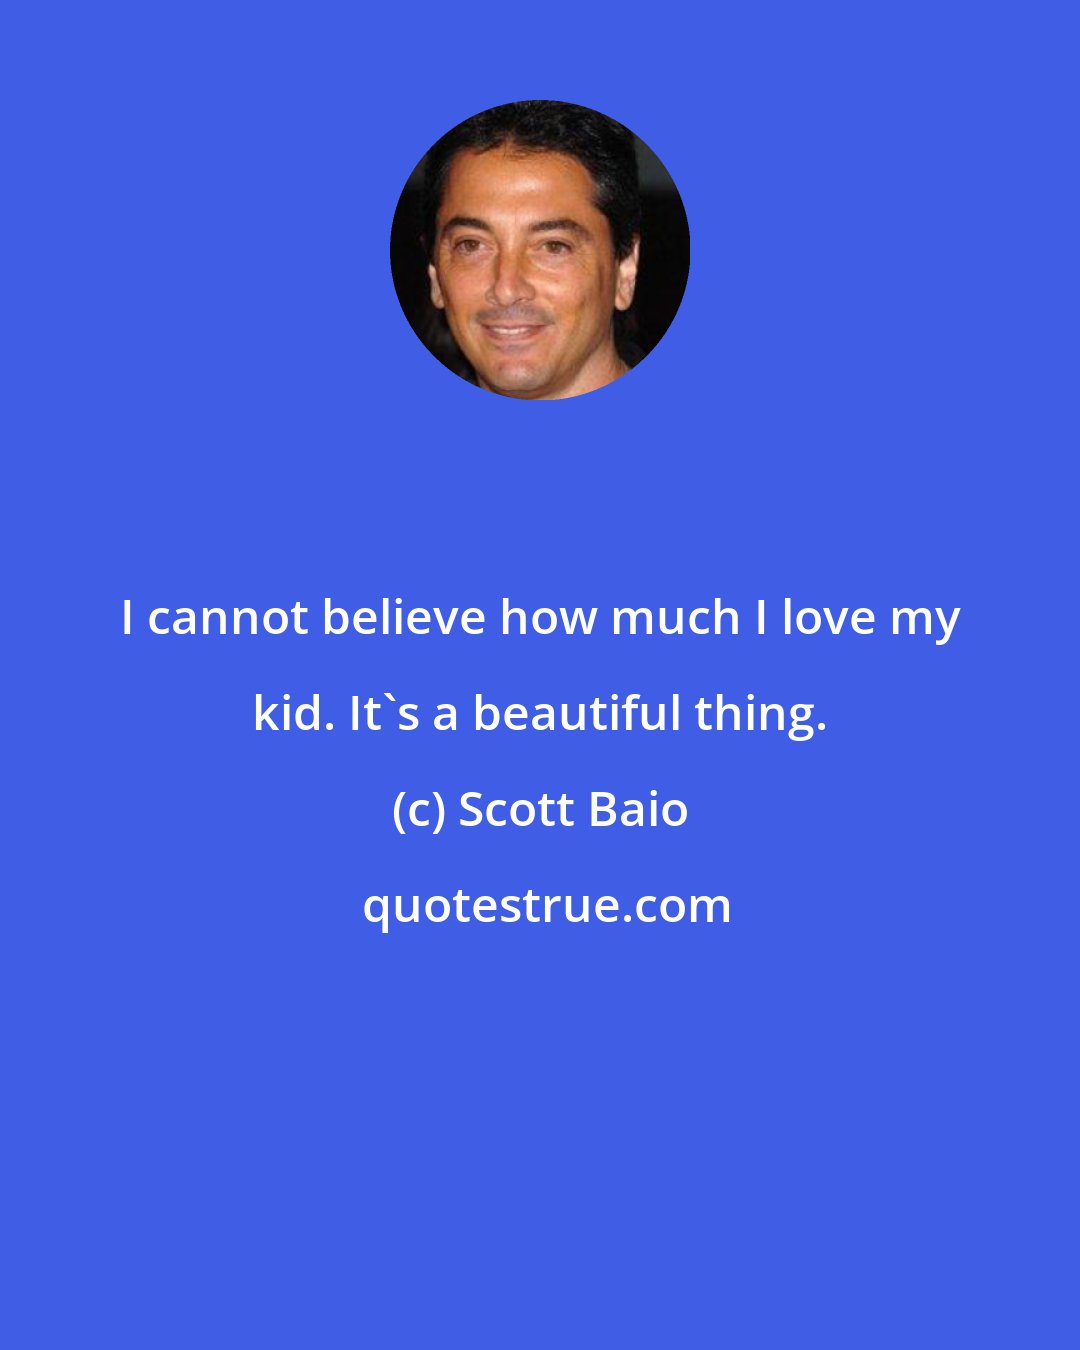 Scott Baio: I cannot believe how much I love my kid. It's a beautiful thing.